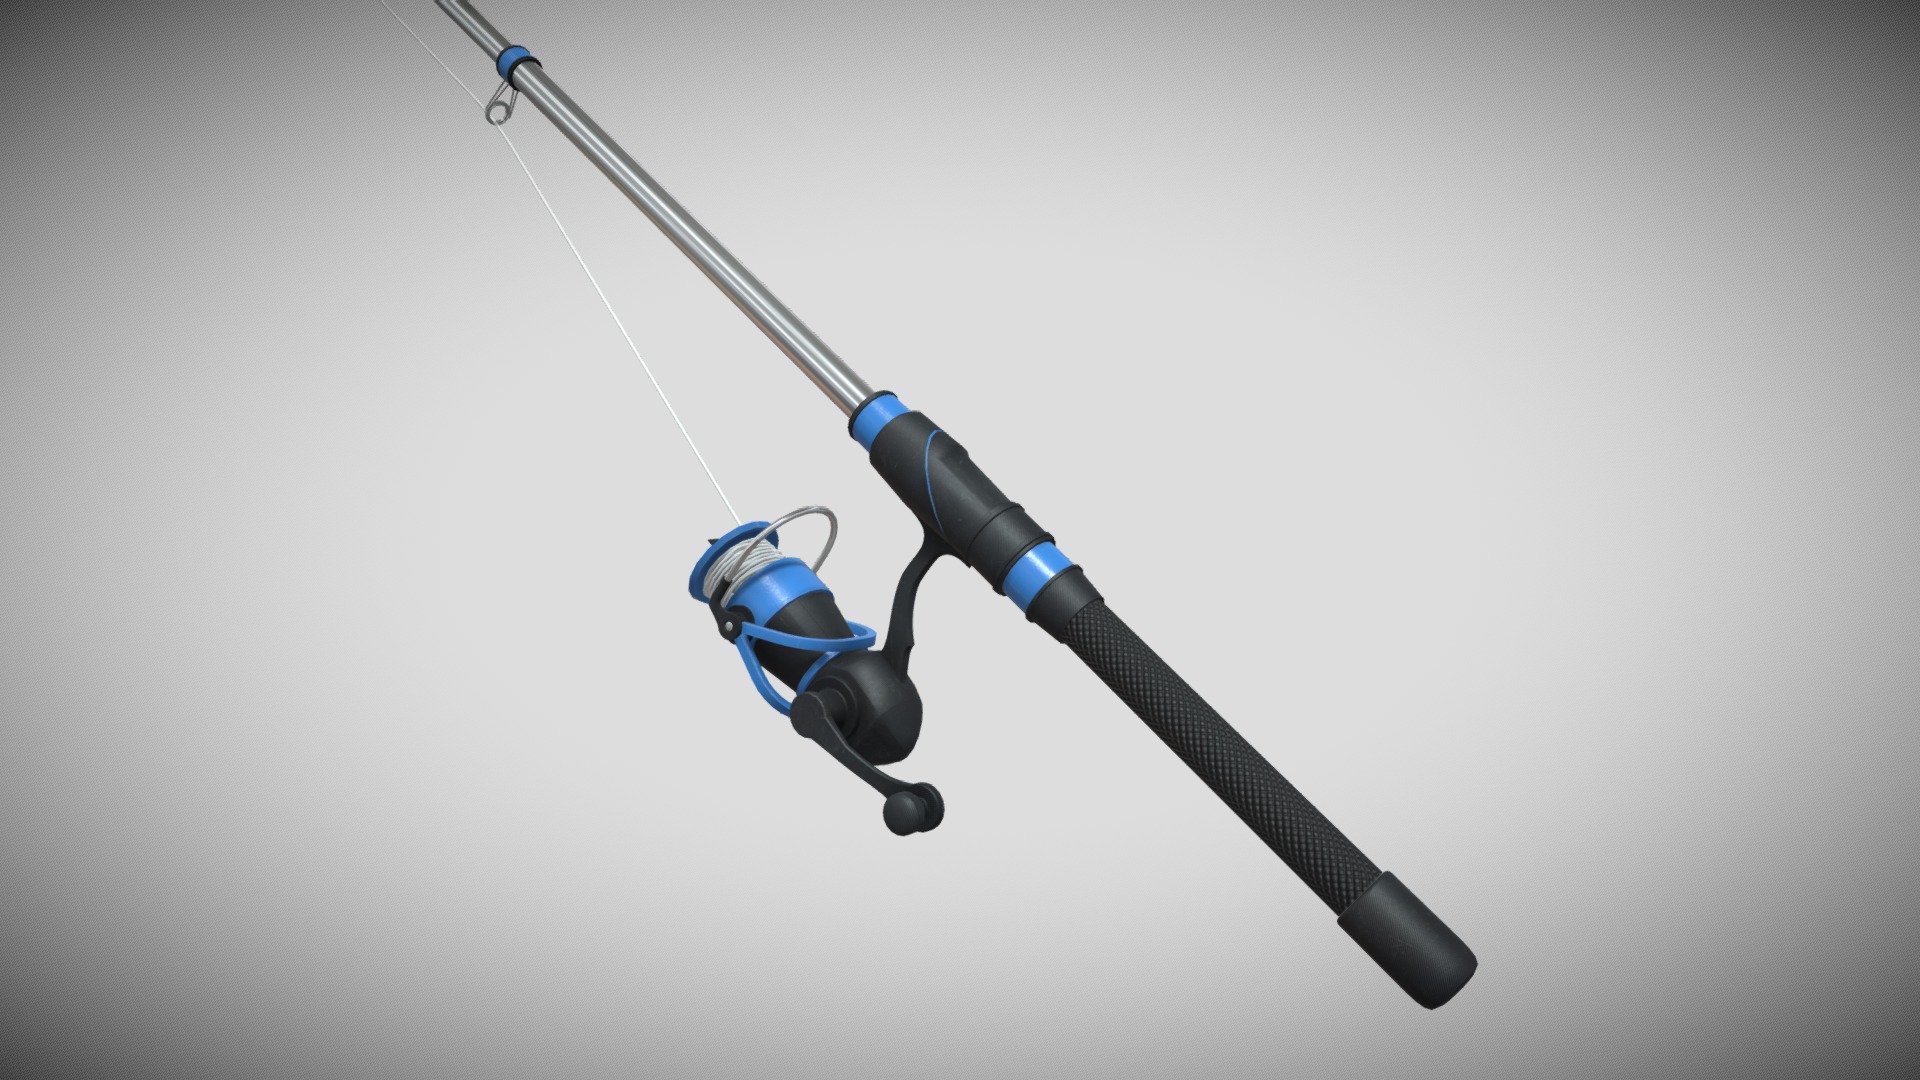 A fishing rod is a long, flexible rod used for casting a fishing line and hook into the water to catch fish 3d model